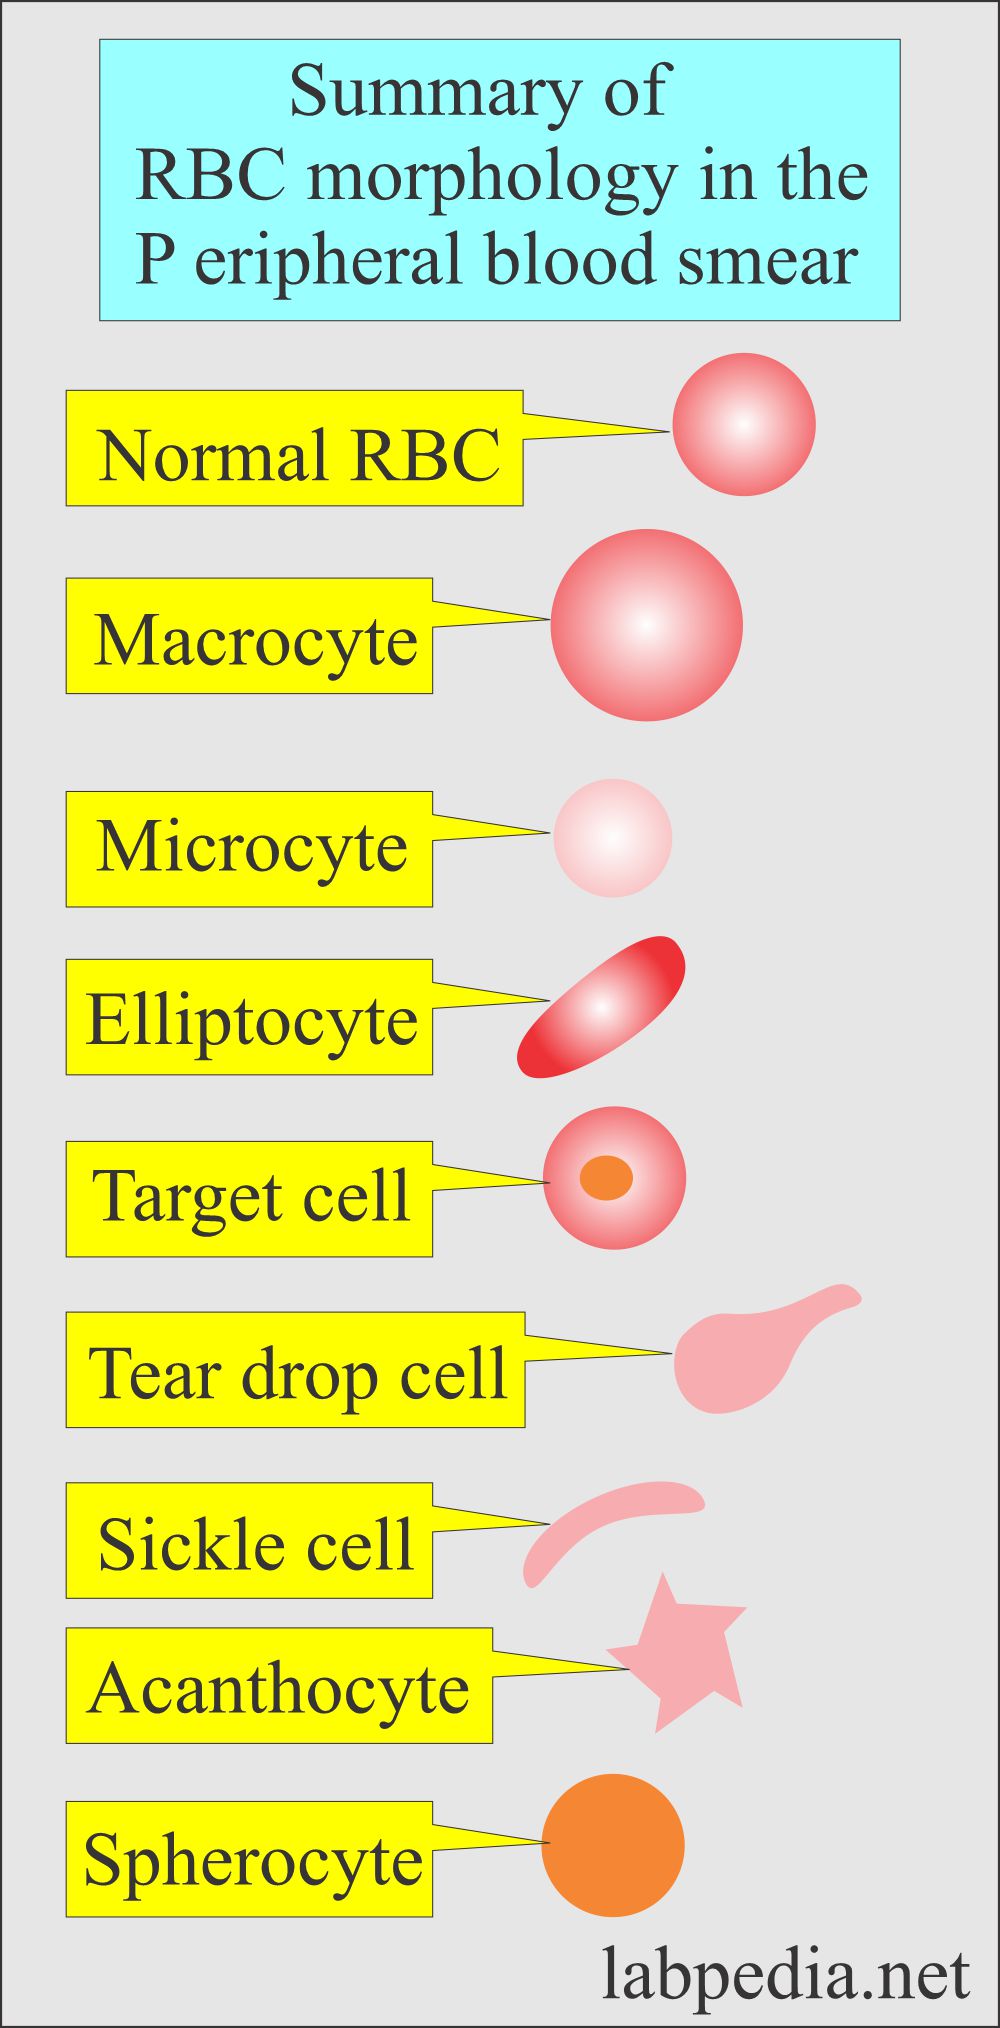 Summary of the peripheral blood smear